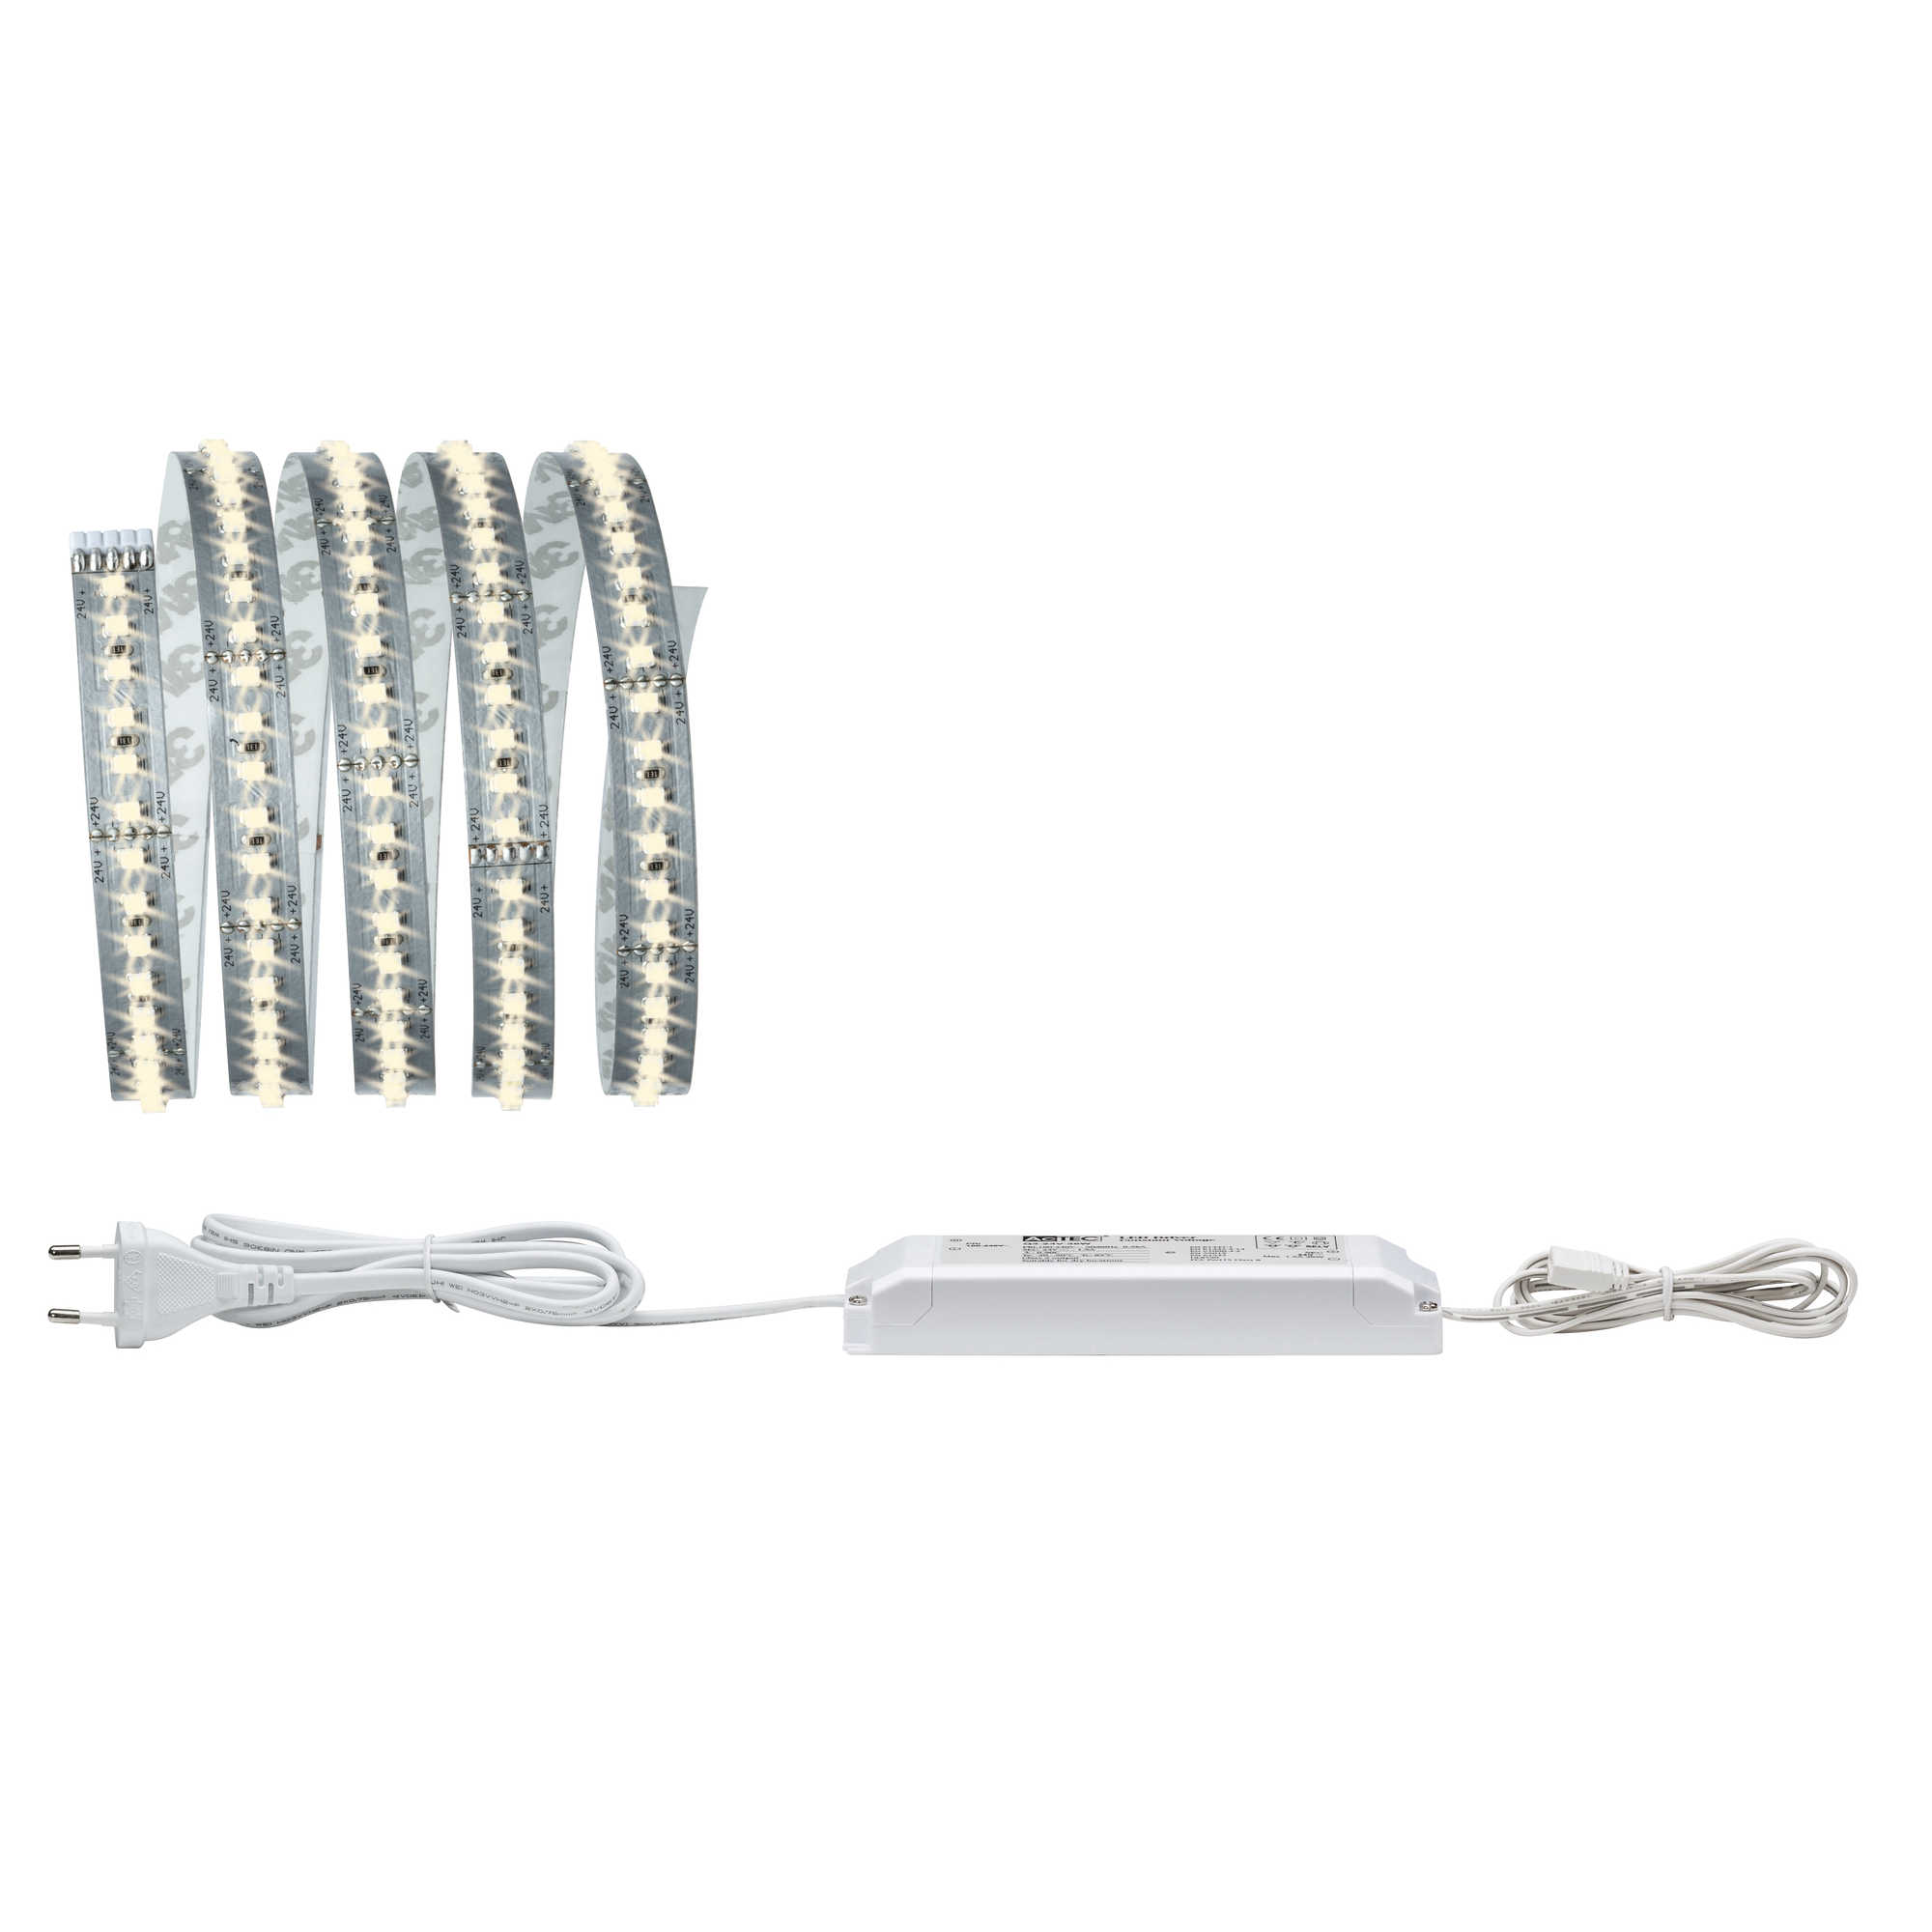 Function MaxLED 1000 Basisset 1,5 m Warmweiß 20 W 230/24 V 60 VA Silber + product picture